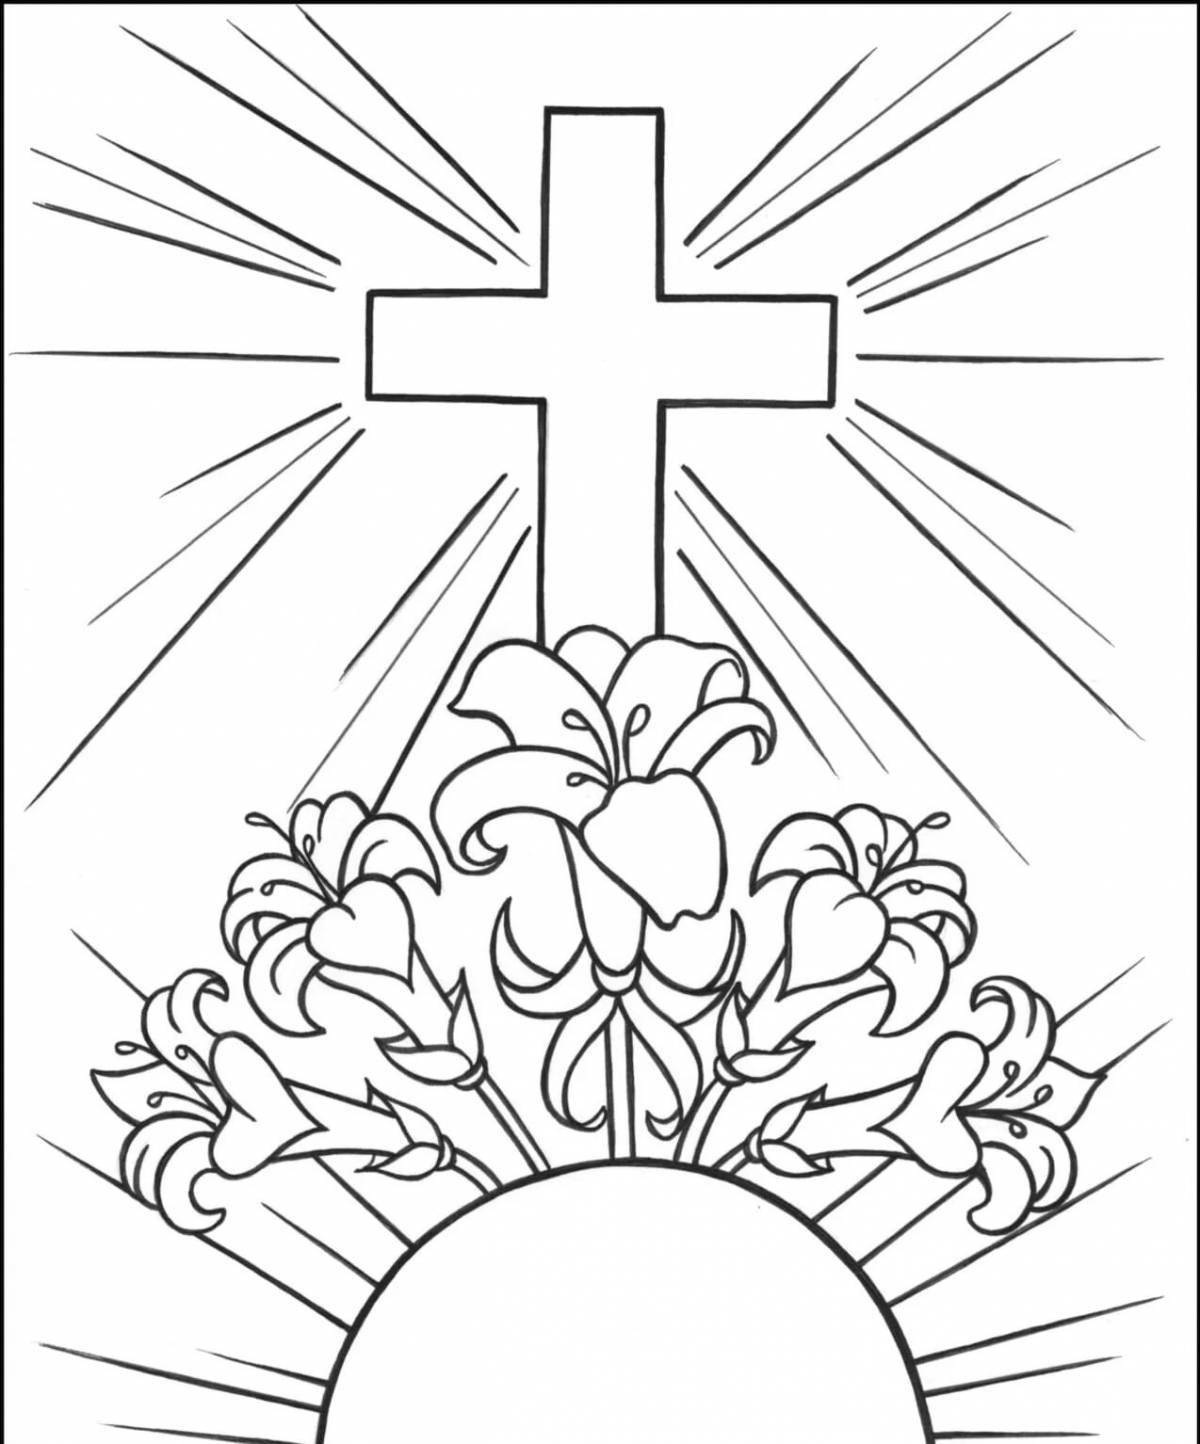 Glorious cross coloring pages for kids